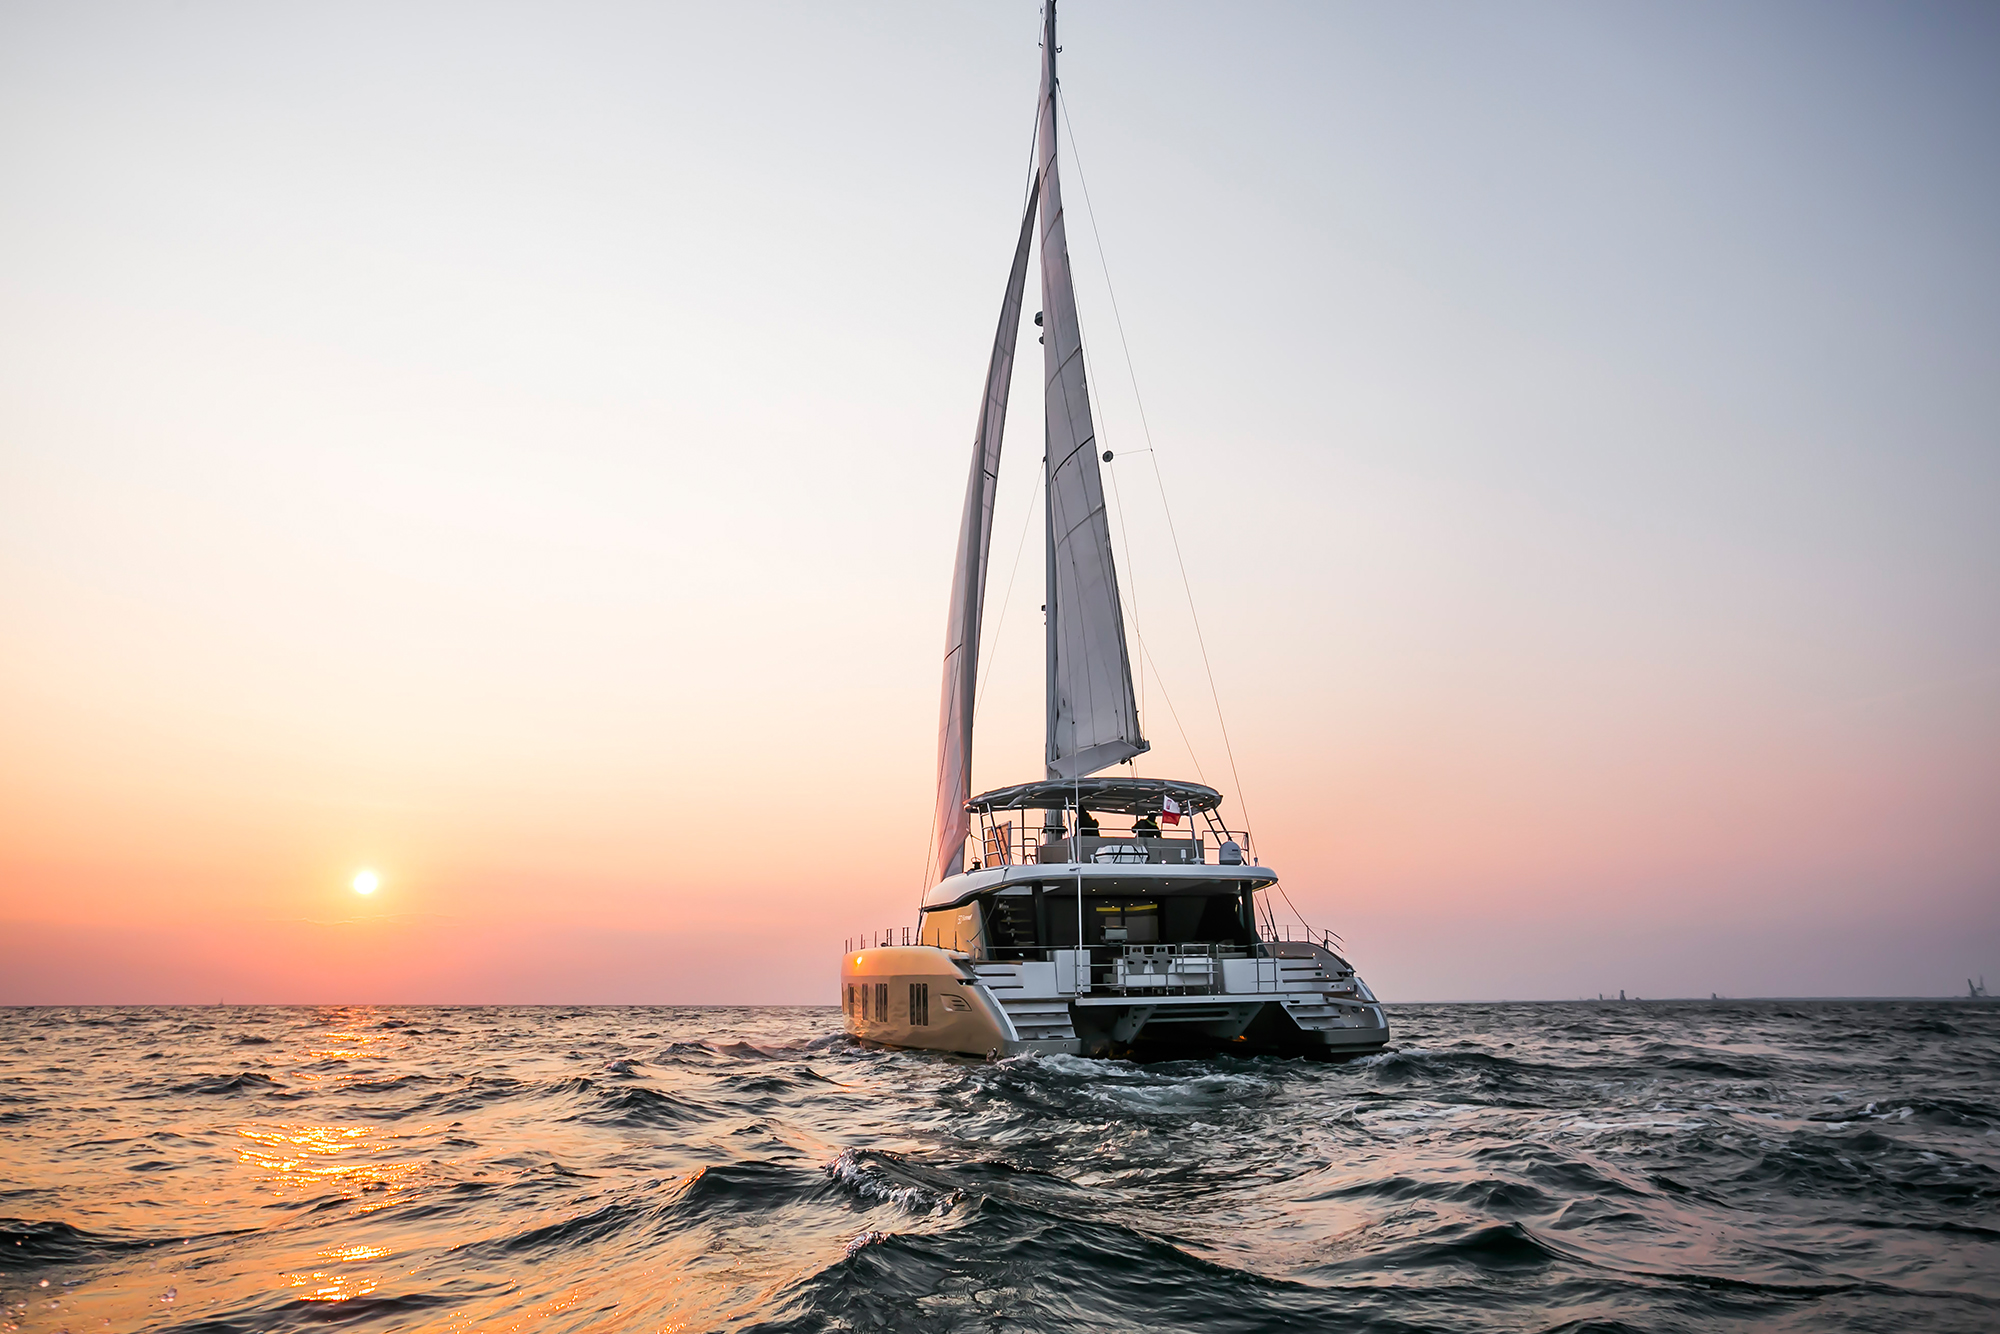 Launched Sail  for Sale  Sunreef 50 Boat Highlights